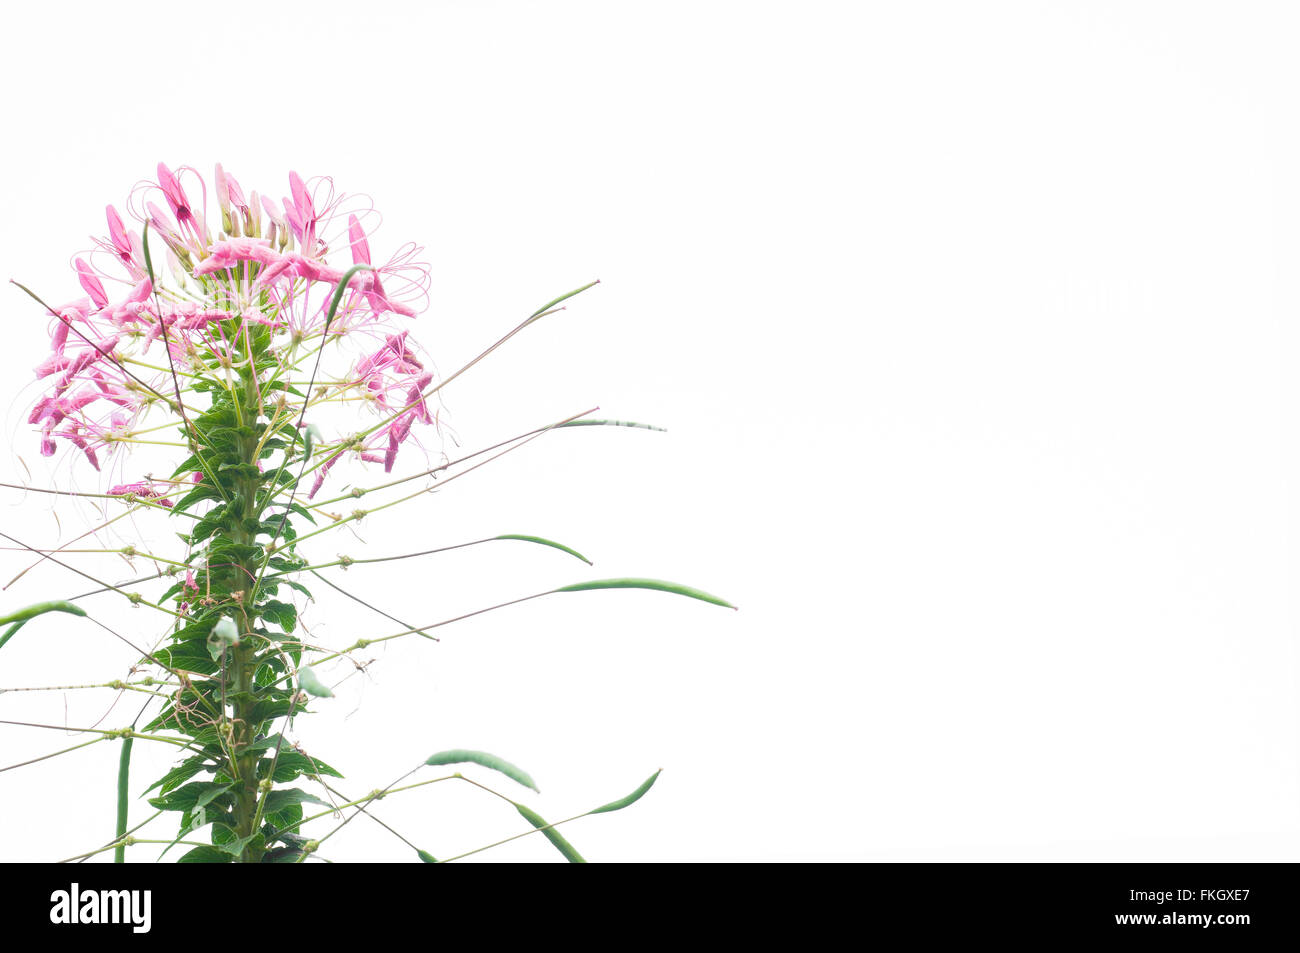 Spider flower isolated on white background. Stock Photo